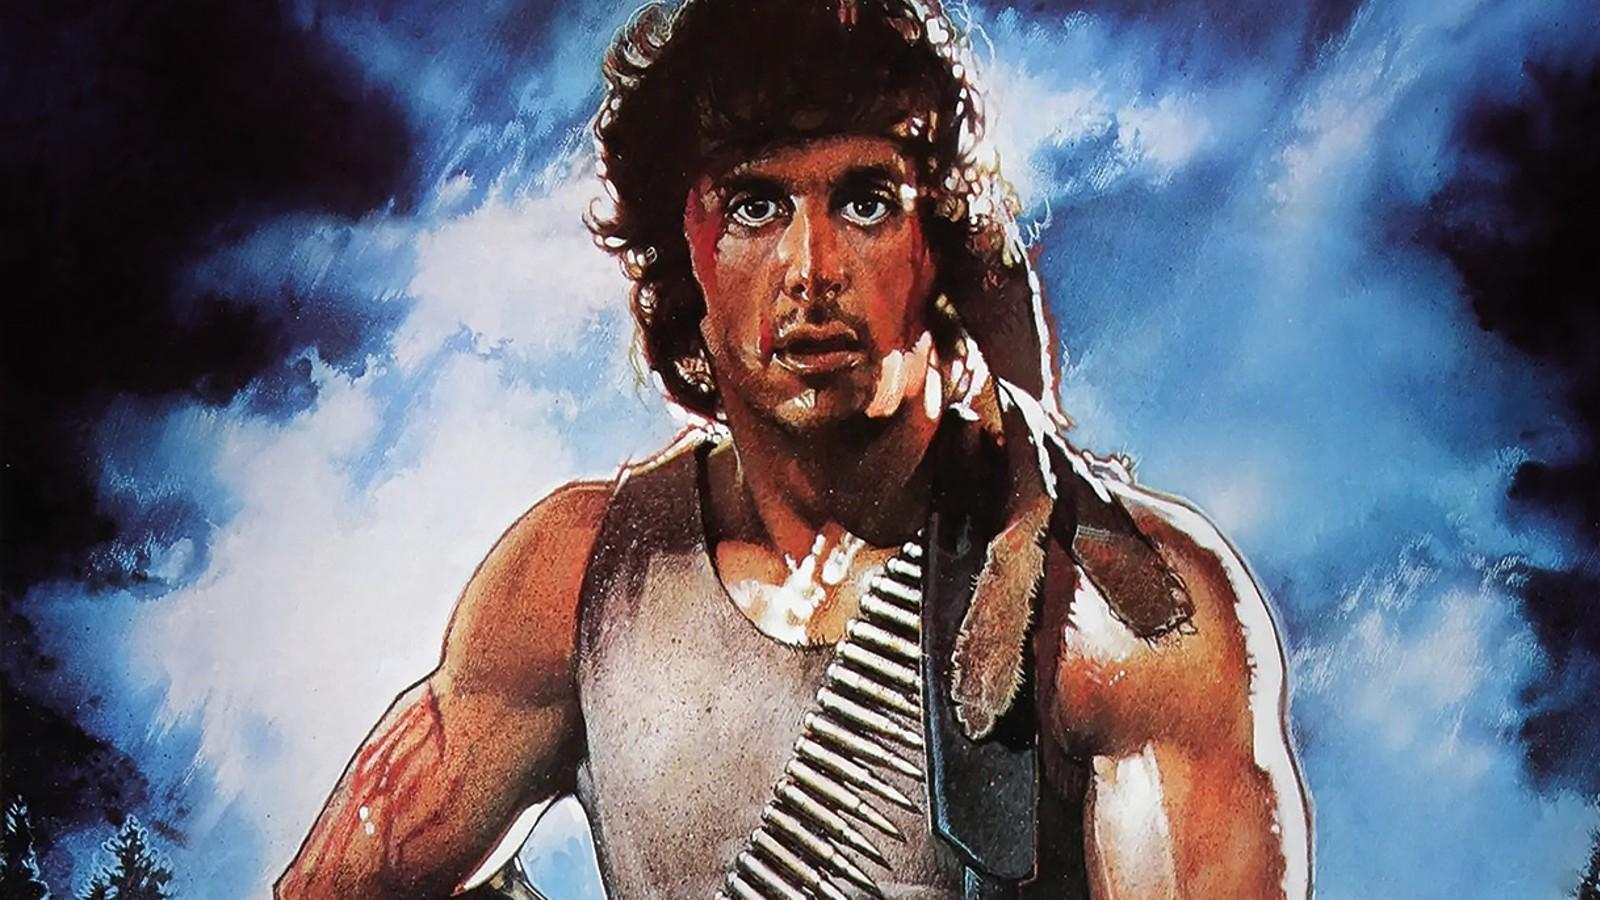 Sylvester Stallone as Rambo on the First Blood poster.